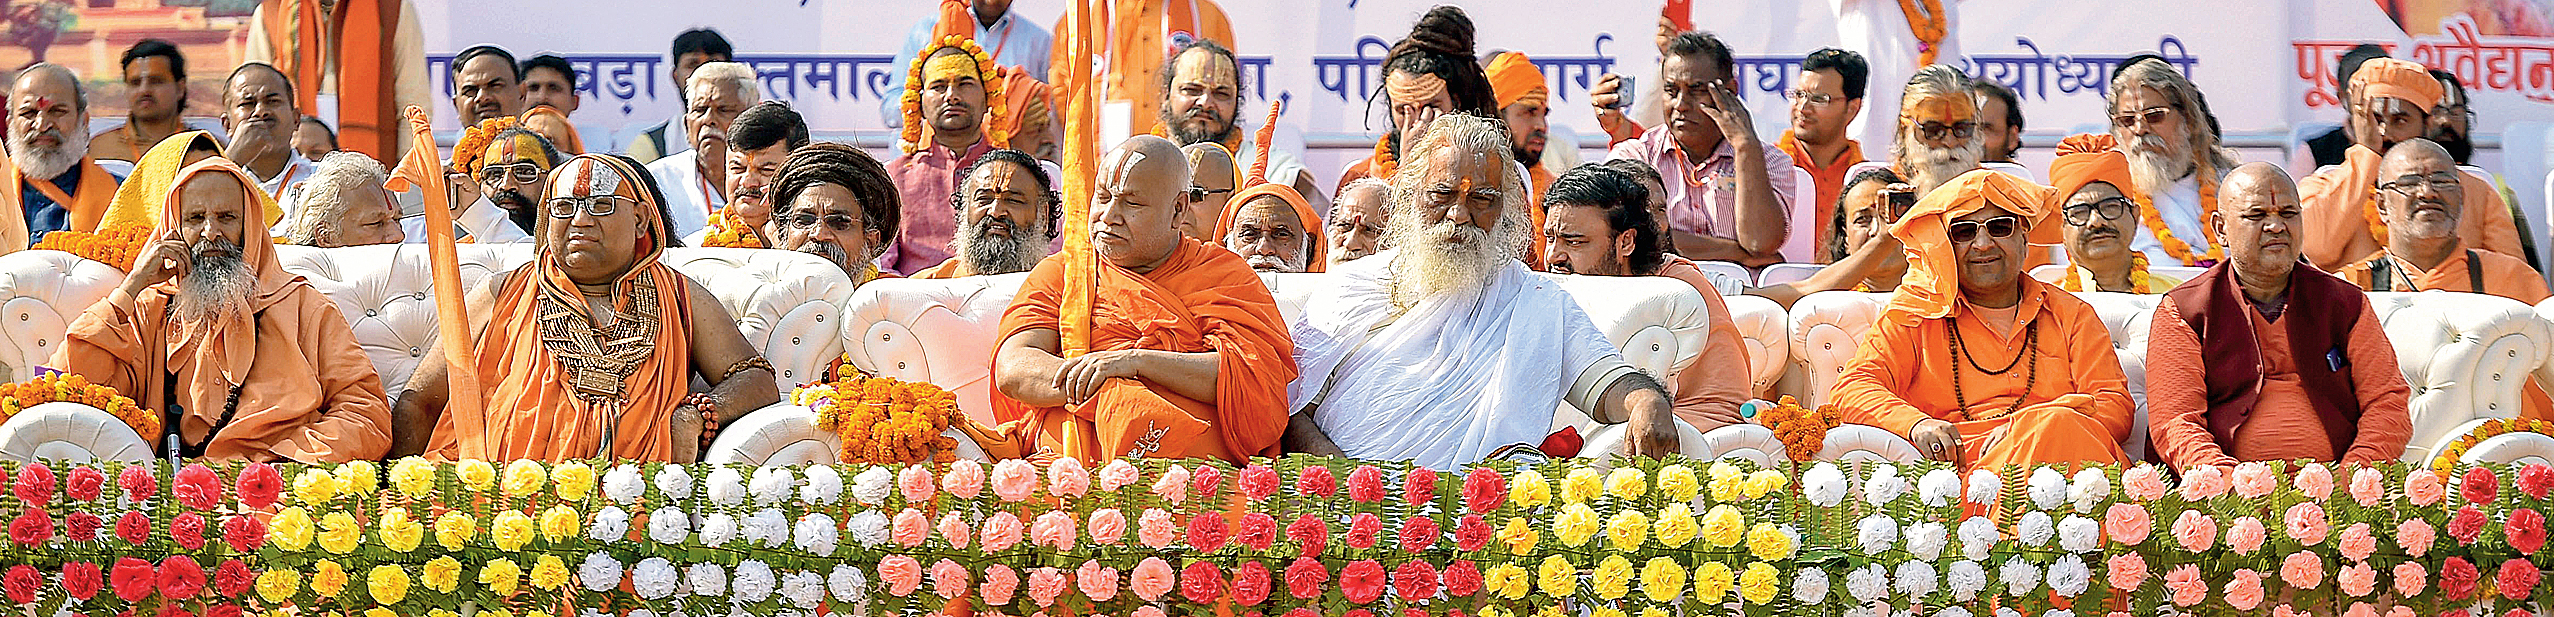 Ayodhya monk claims temple-law pledge by minister